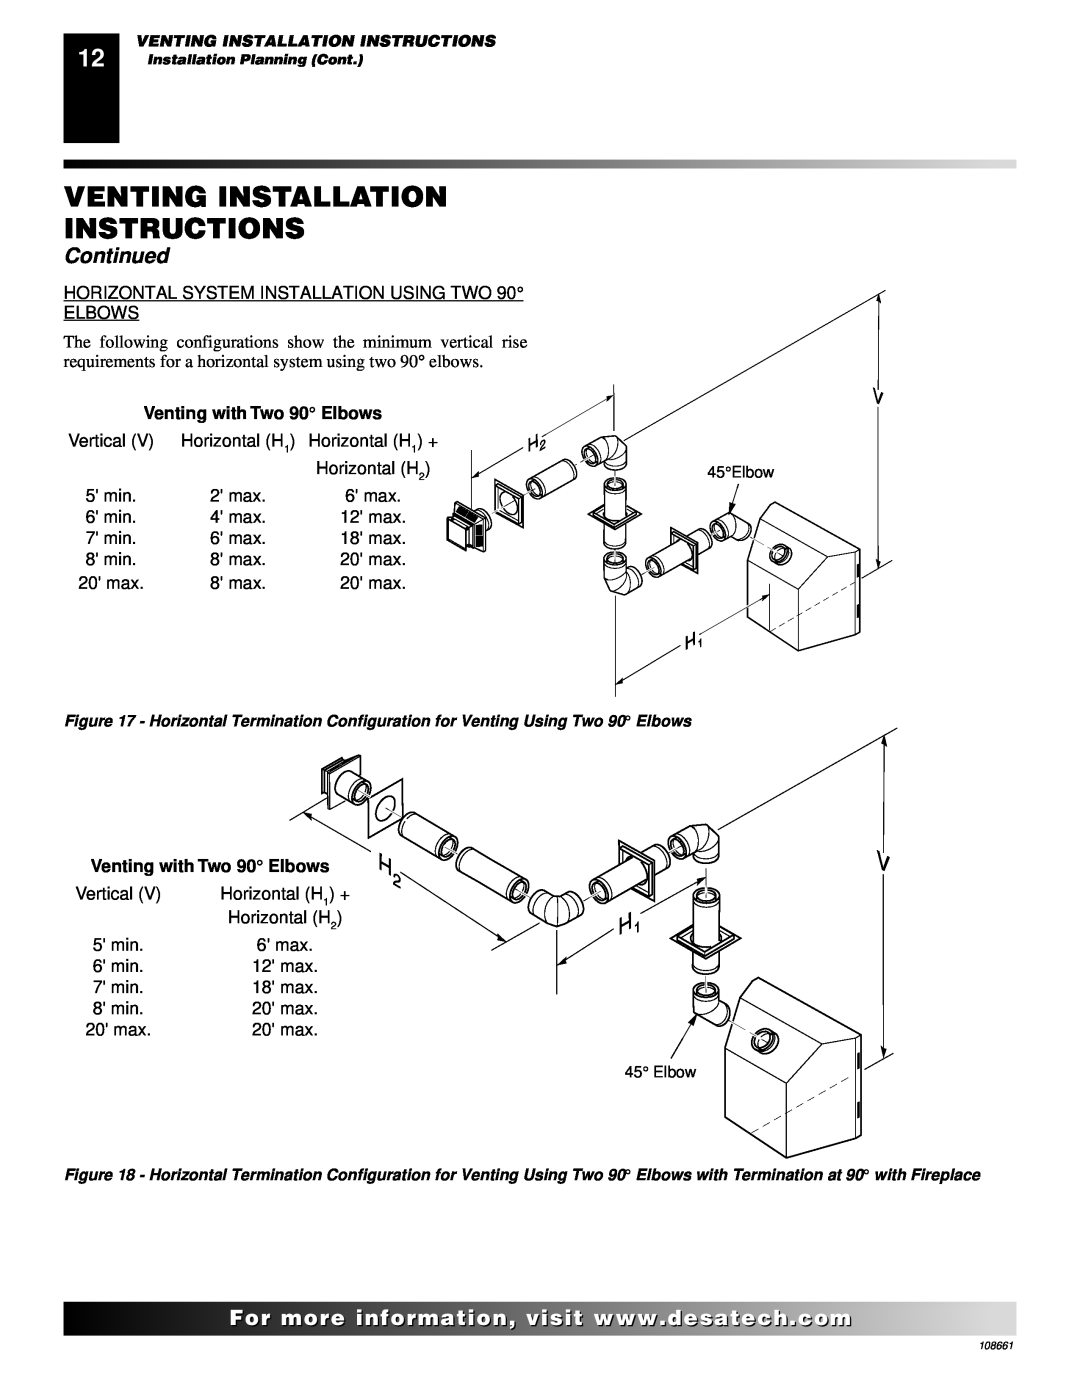 Desa T32N, T36N, T32P, T36P installation manual Venting Installation Instructions, Continued, Venting with Two 90 Elbows 